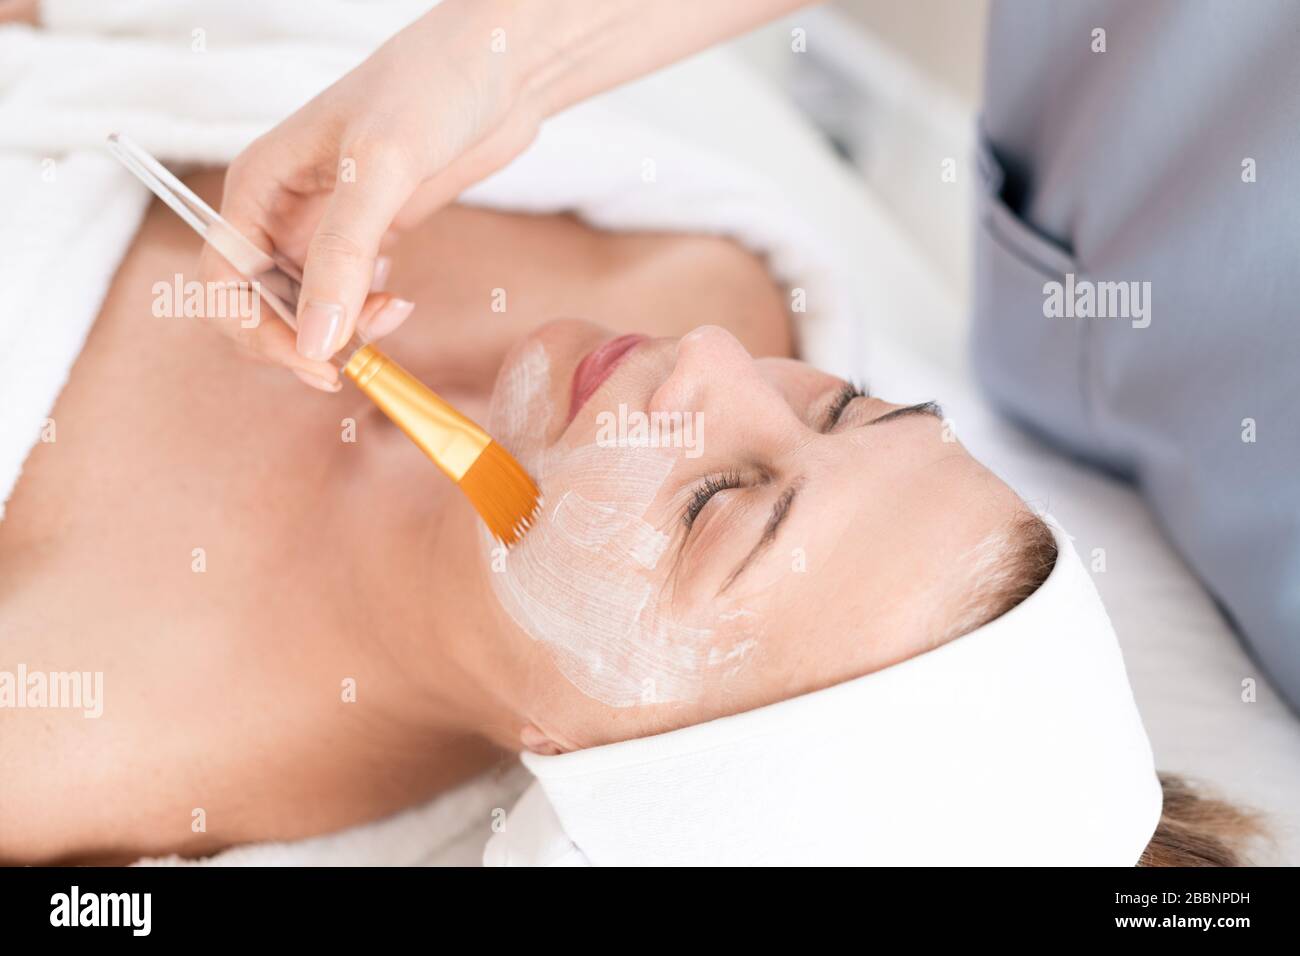 Unrecognizable cosmetologist applying facial mask with brush to mature woman at beauty treatment procedure Stock Photo